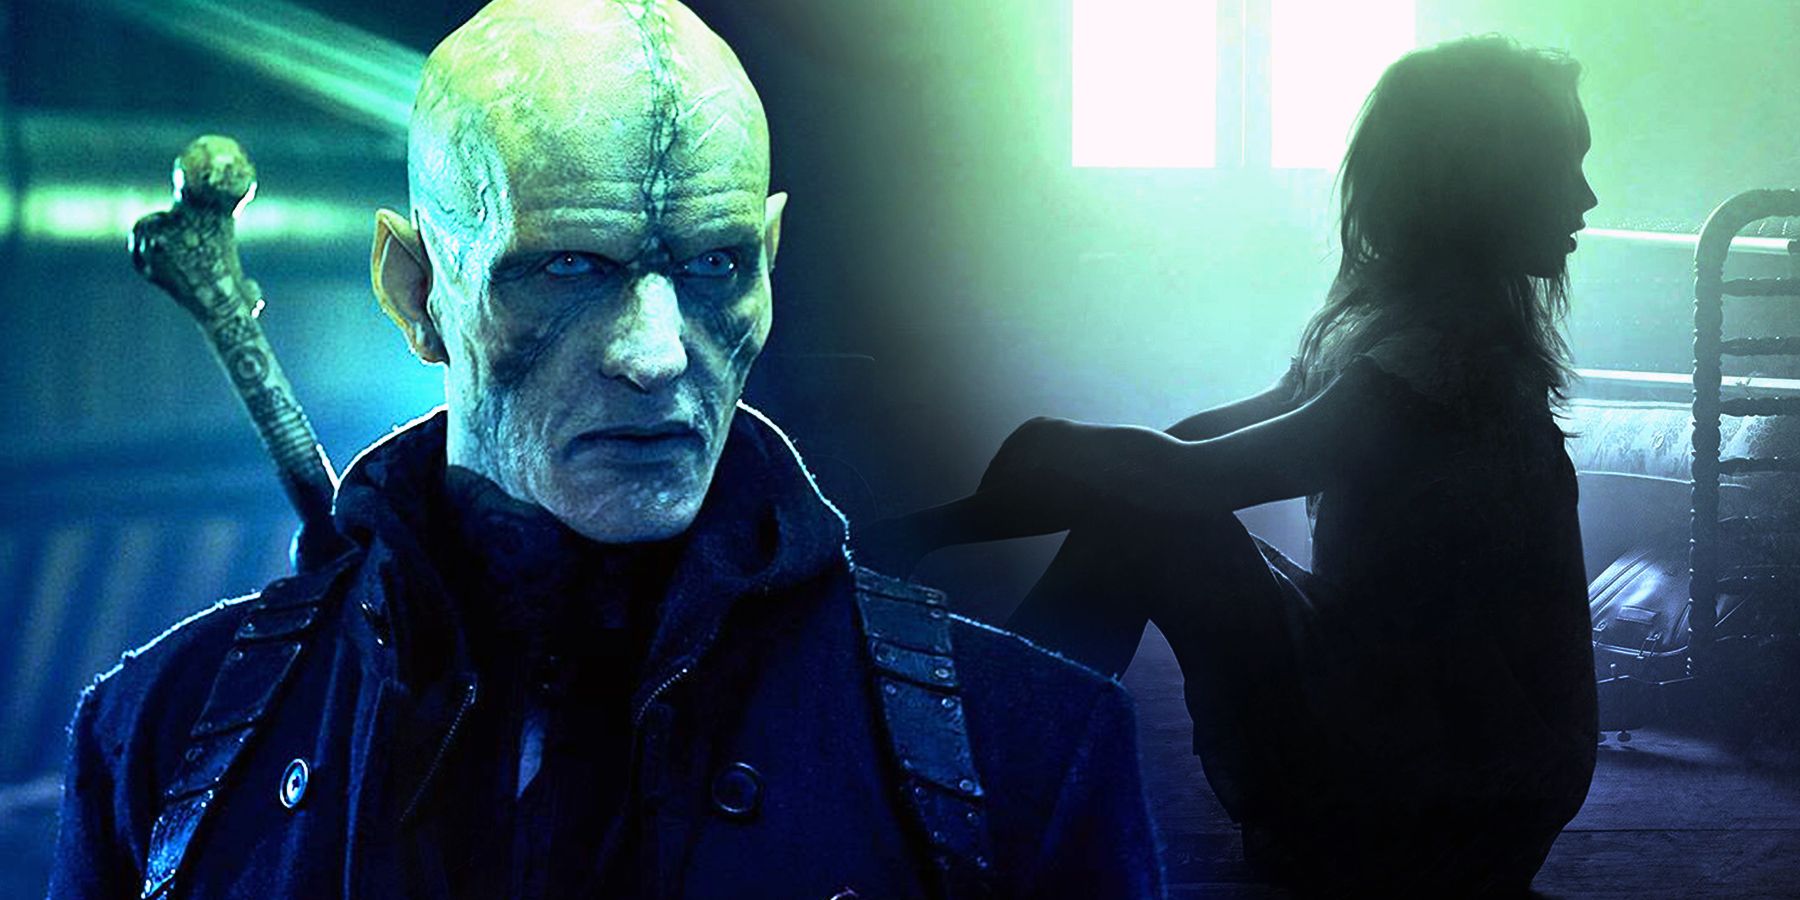 Imagery from TV shows The Strain and The Exorcist